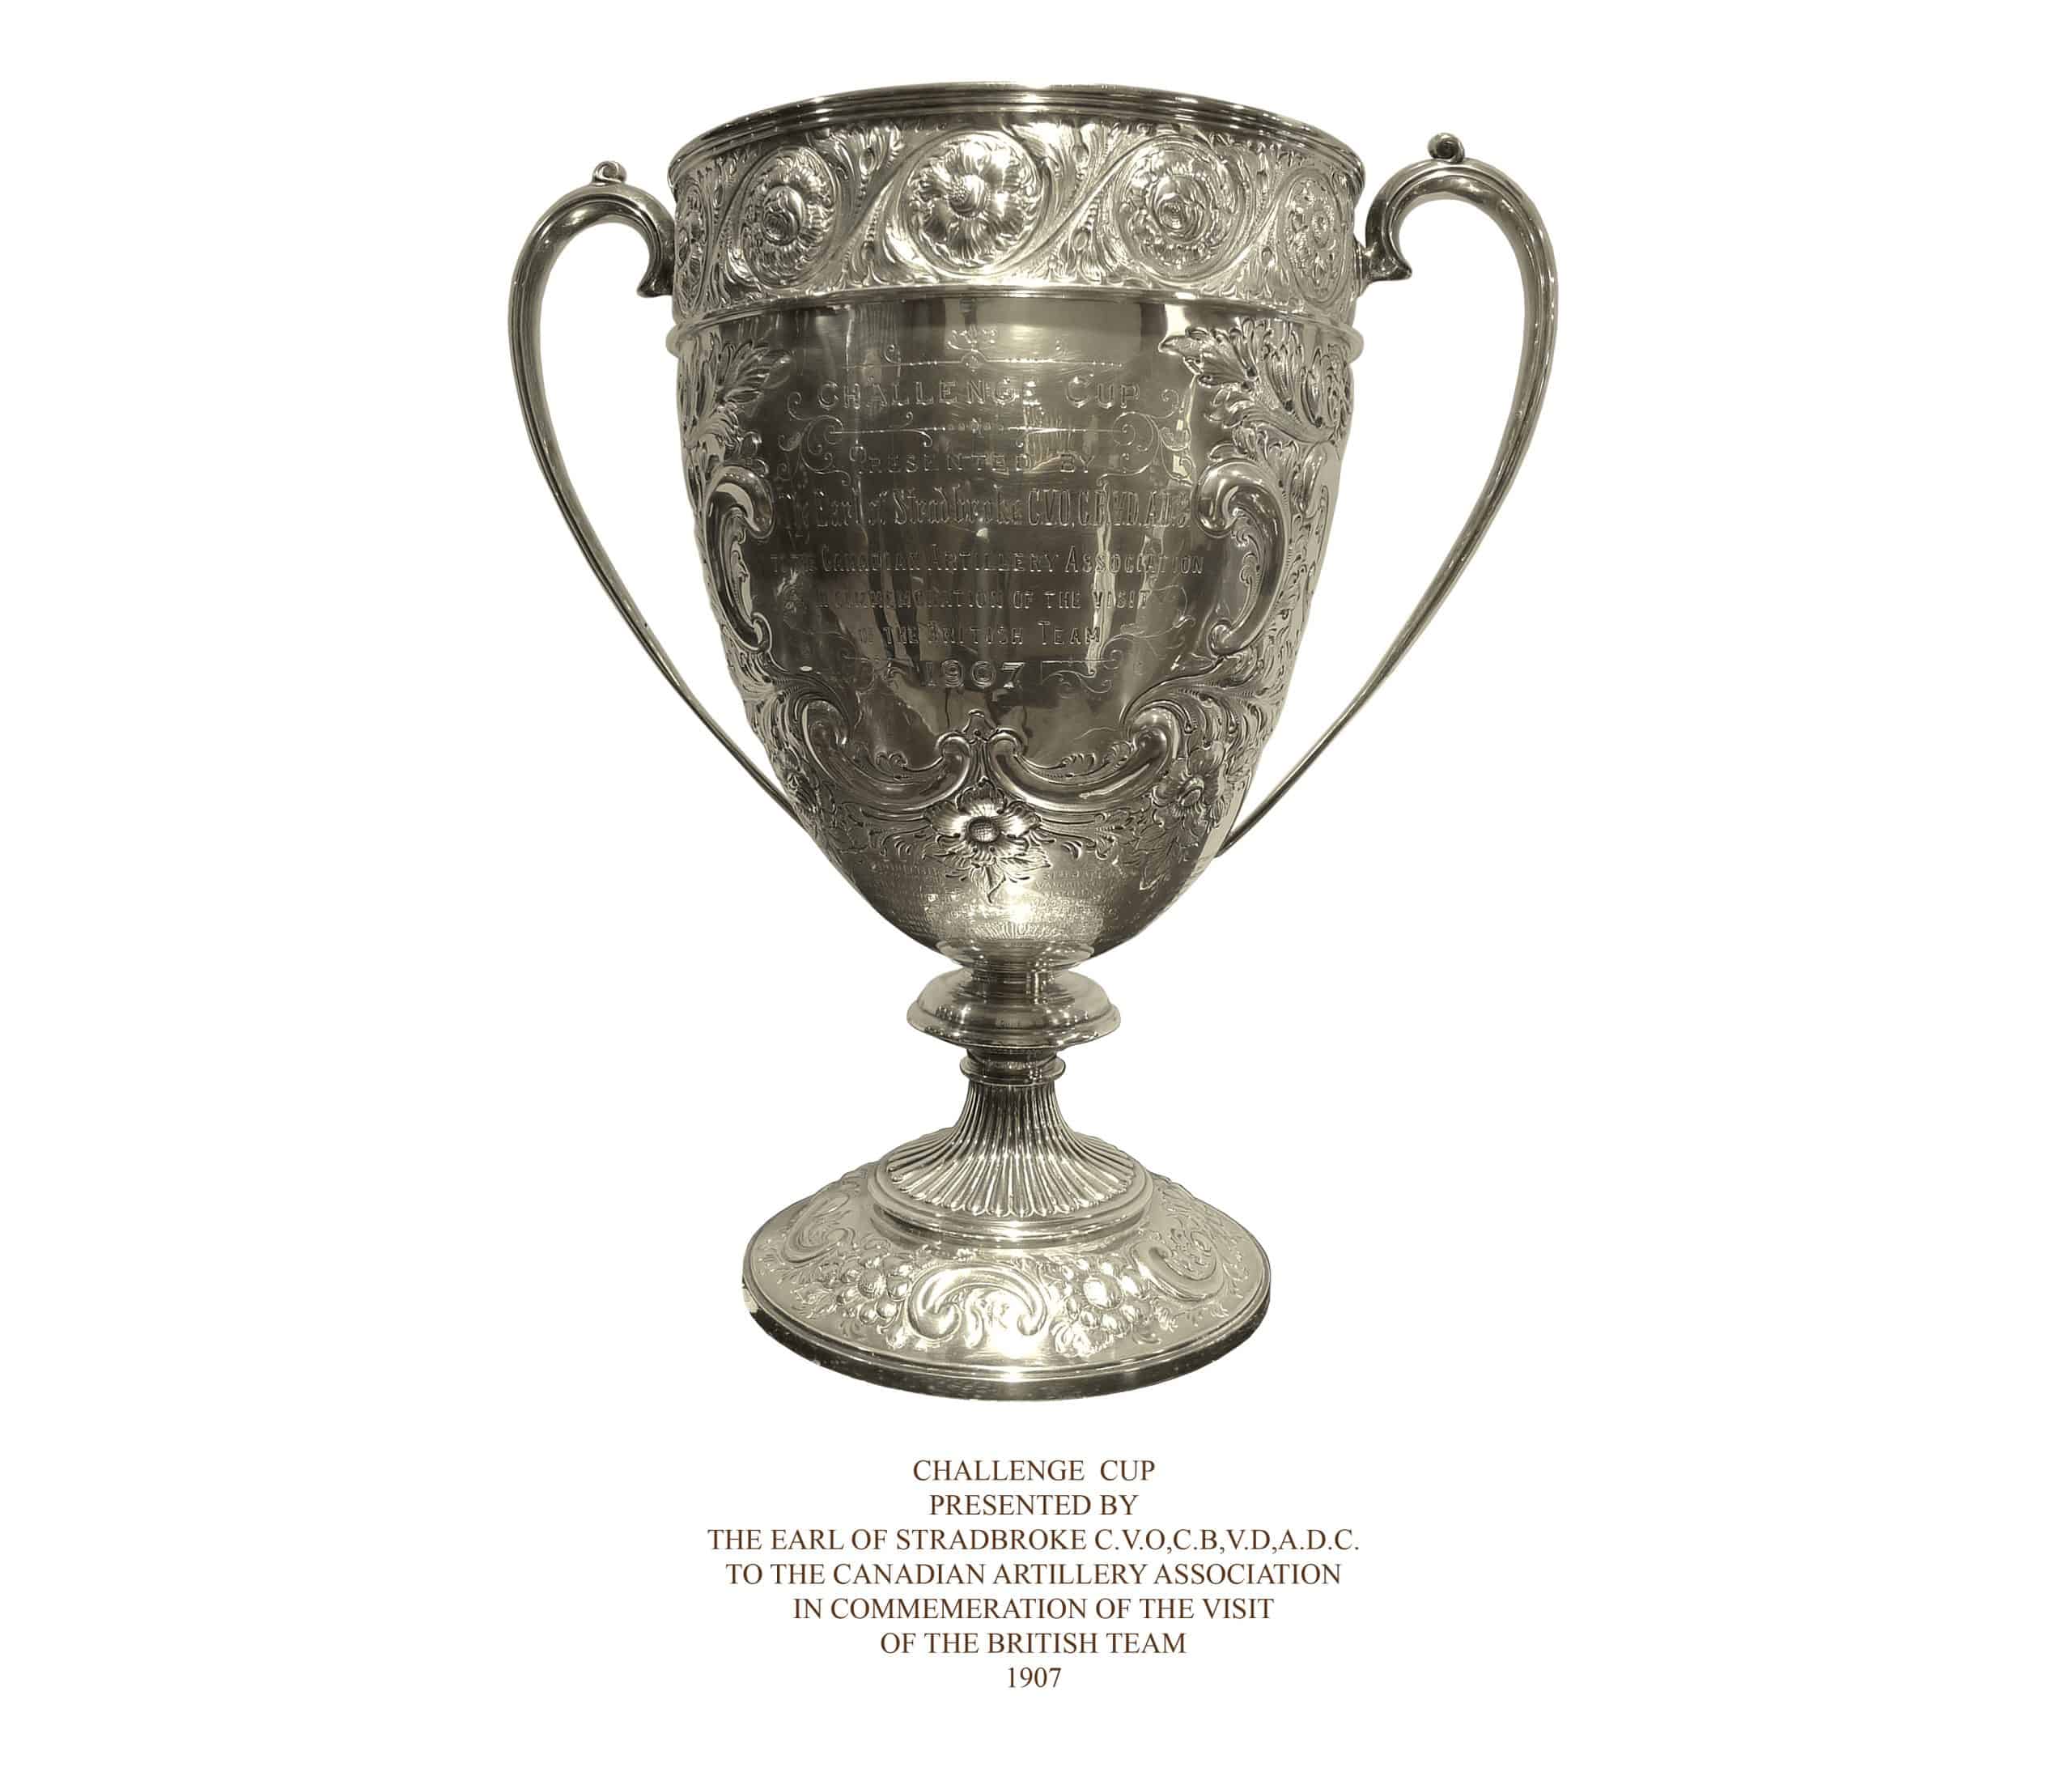 1907-CHALLENGE-CUP-PRESENTED-BY-EARL-OF-STRADBROKE-scaled